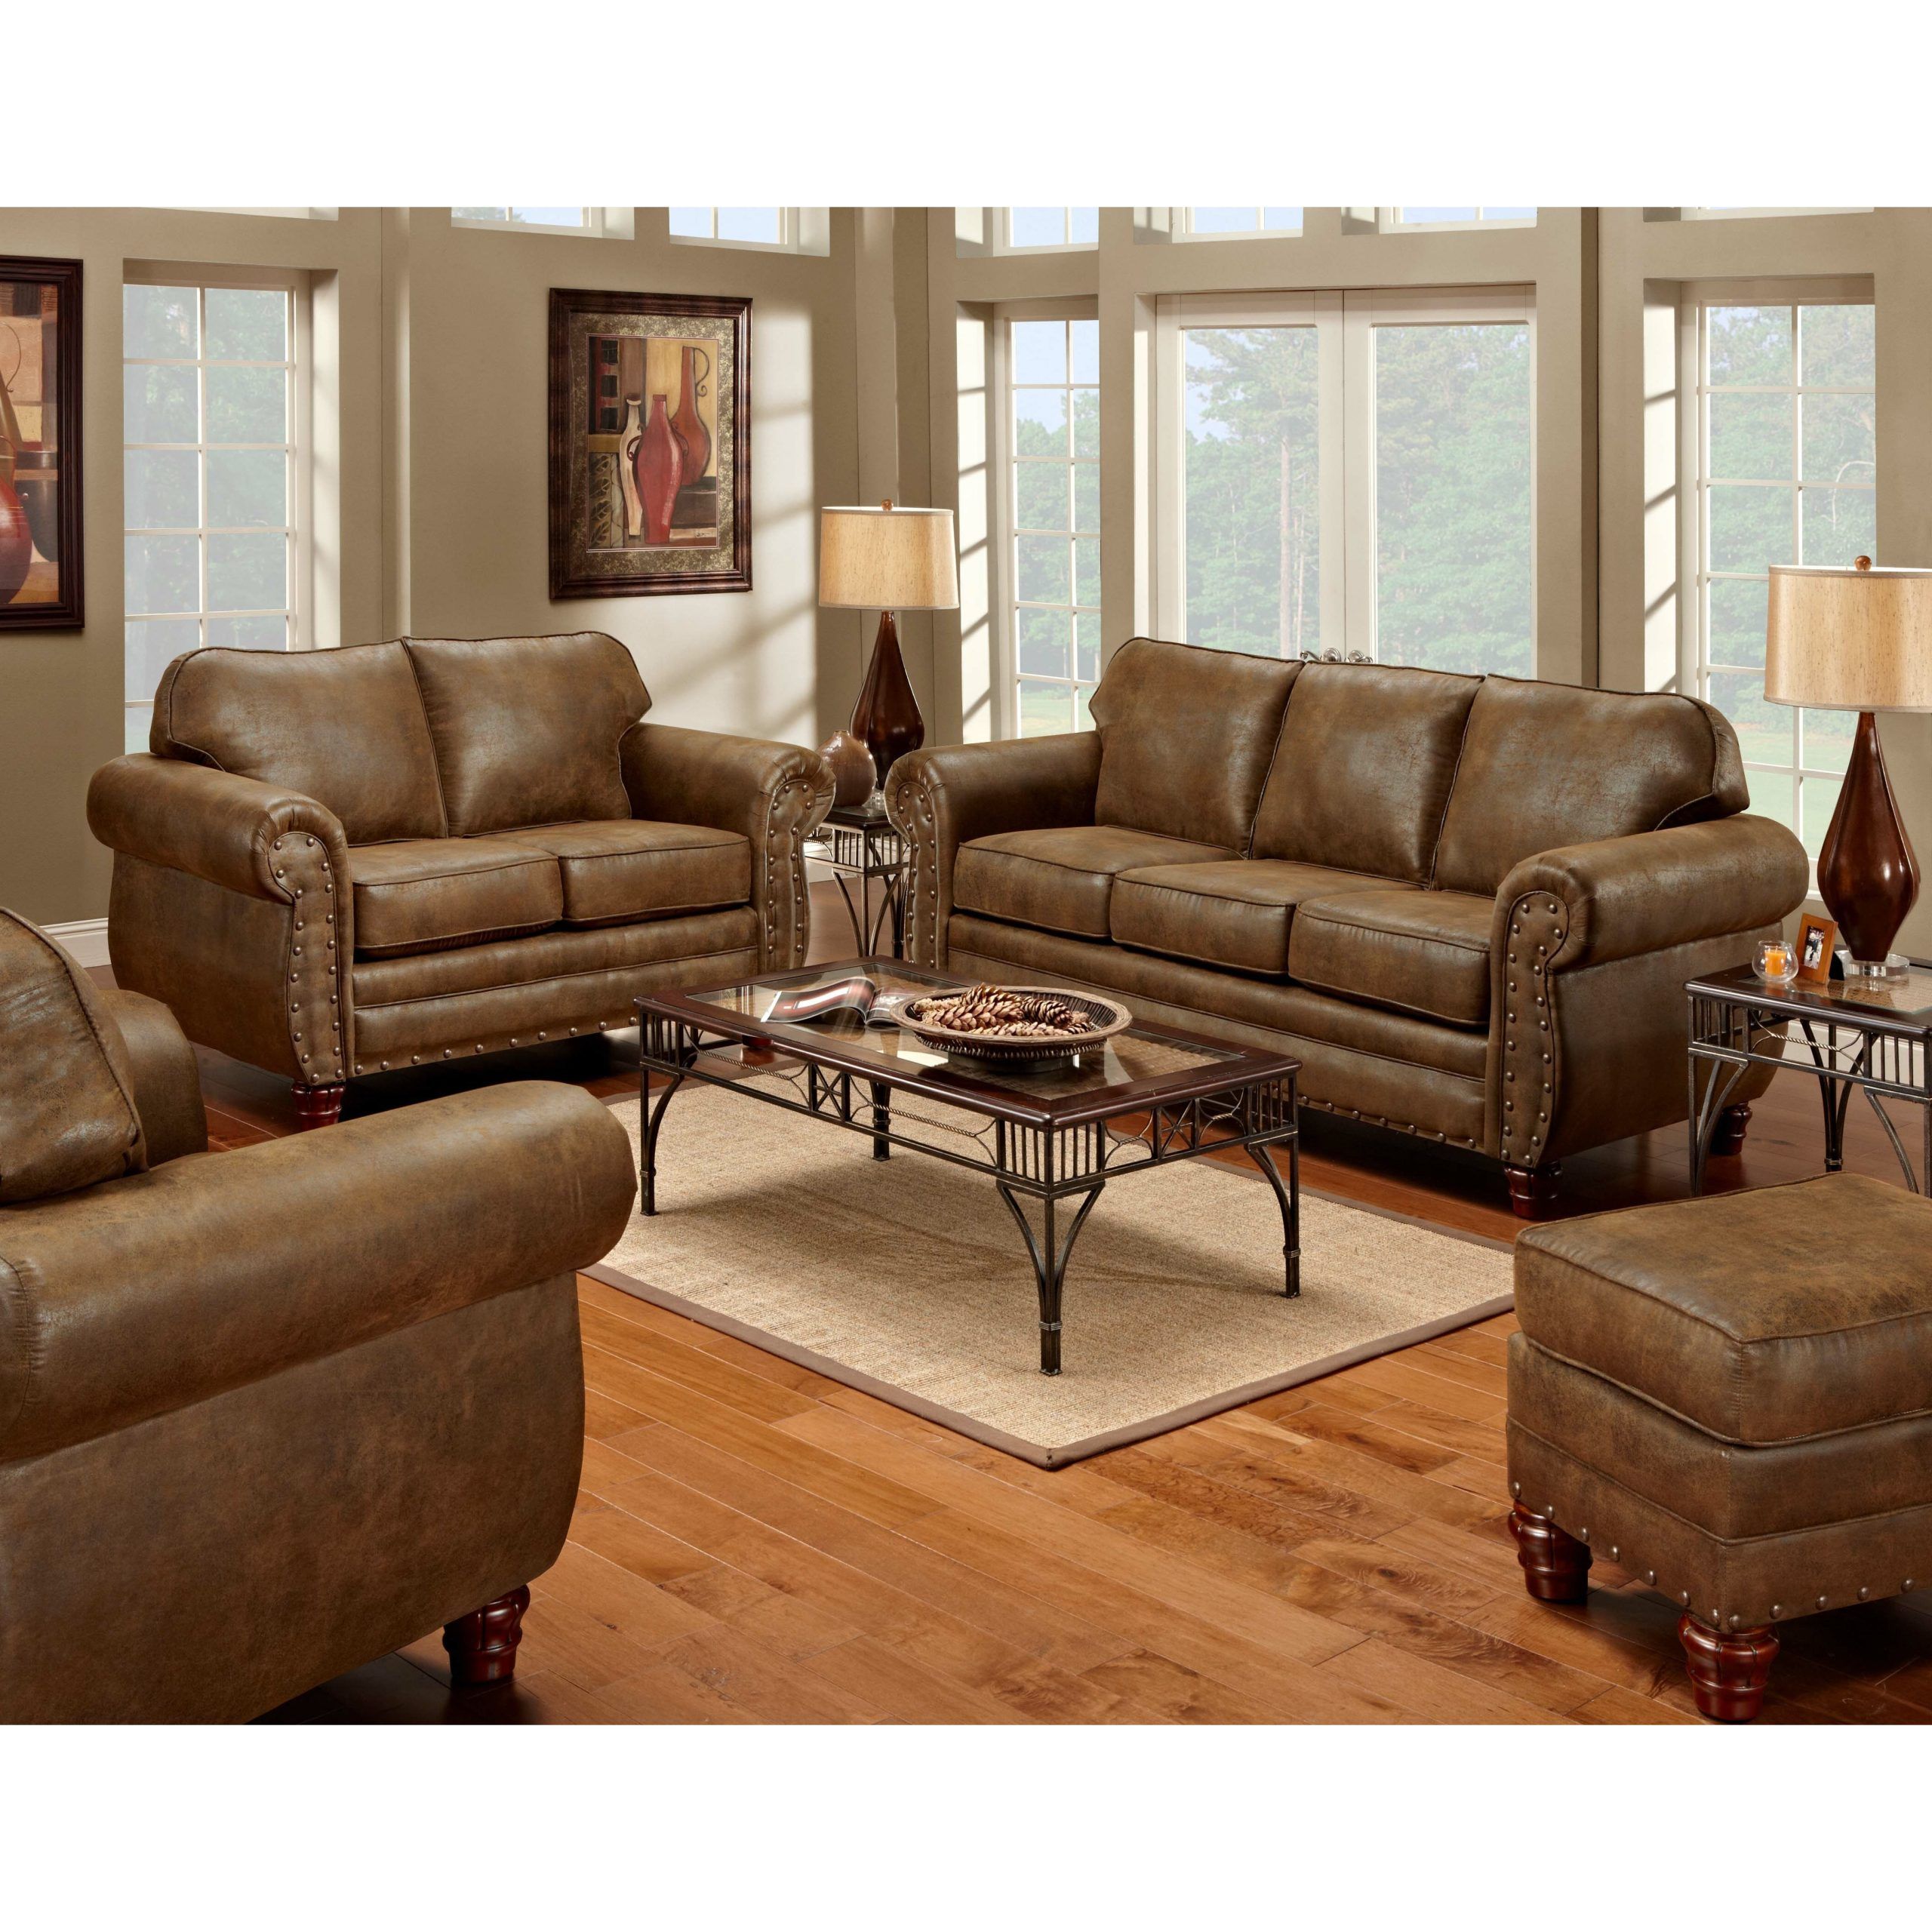 Well Liked Sofas For Living Rooms With American Furniture Classics Sedona 4 Piece Living Room Set With Sleeper (Photo 7 of 15)